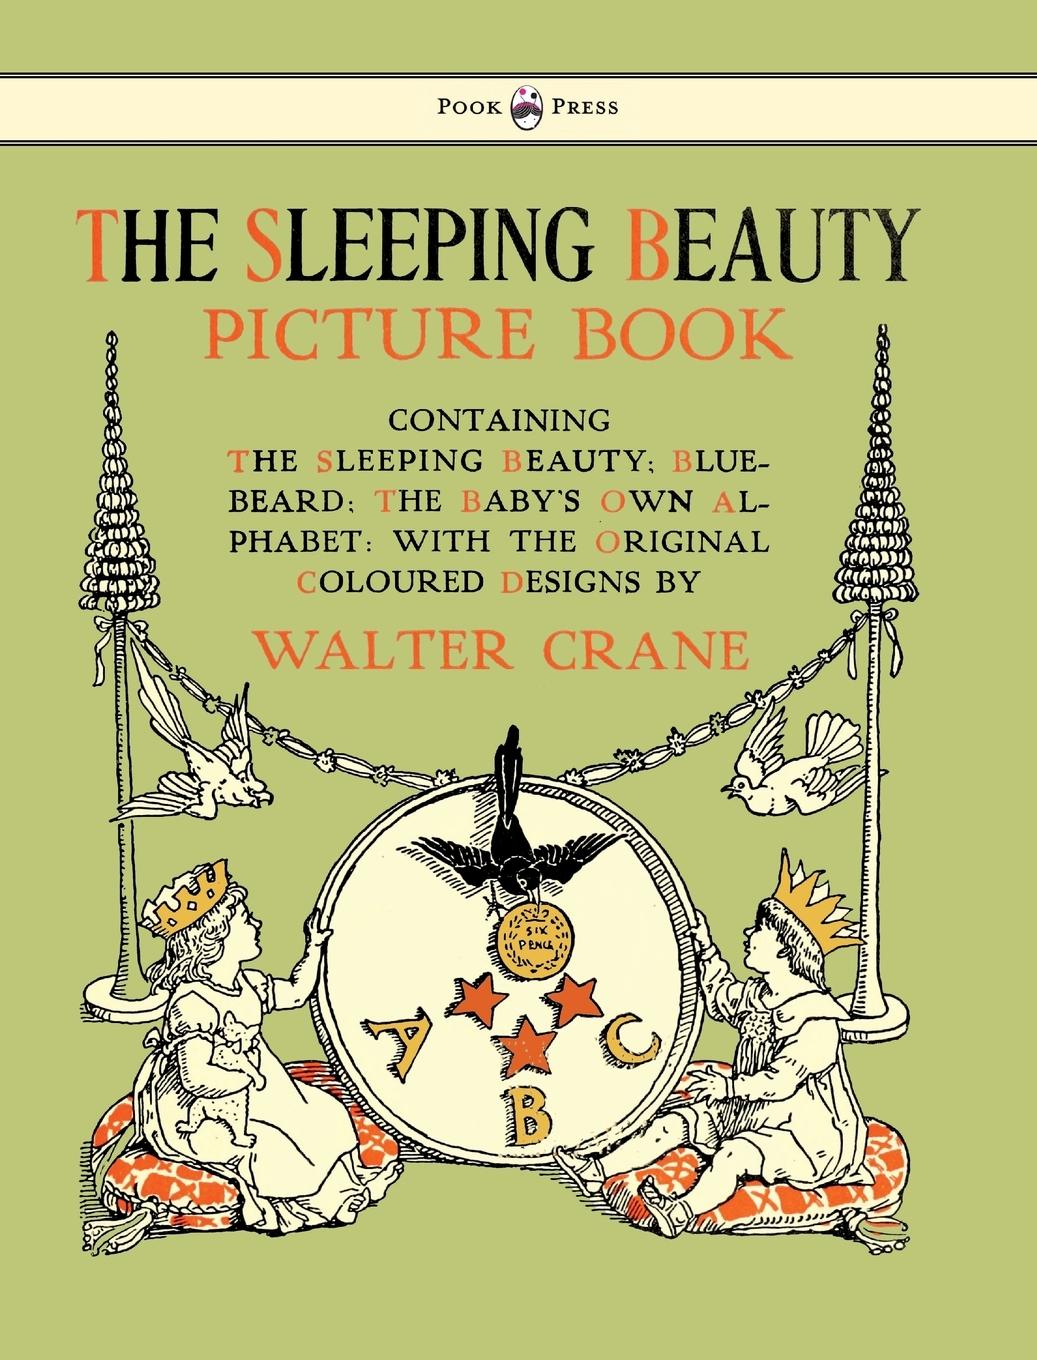 The Sleeping Beauty Picture Book - Containing the Sleeping Beauty, Blue Beard, the Baby s Own Alphabet - Illustrated by Walter Crane